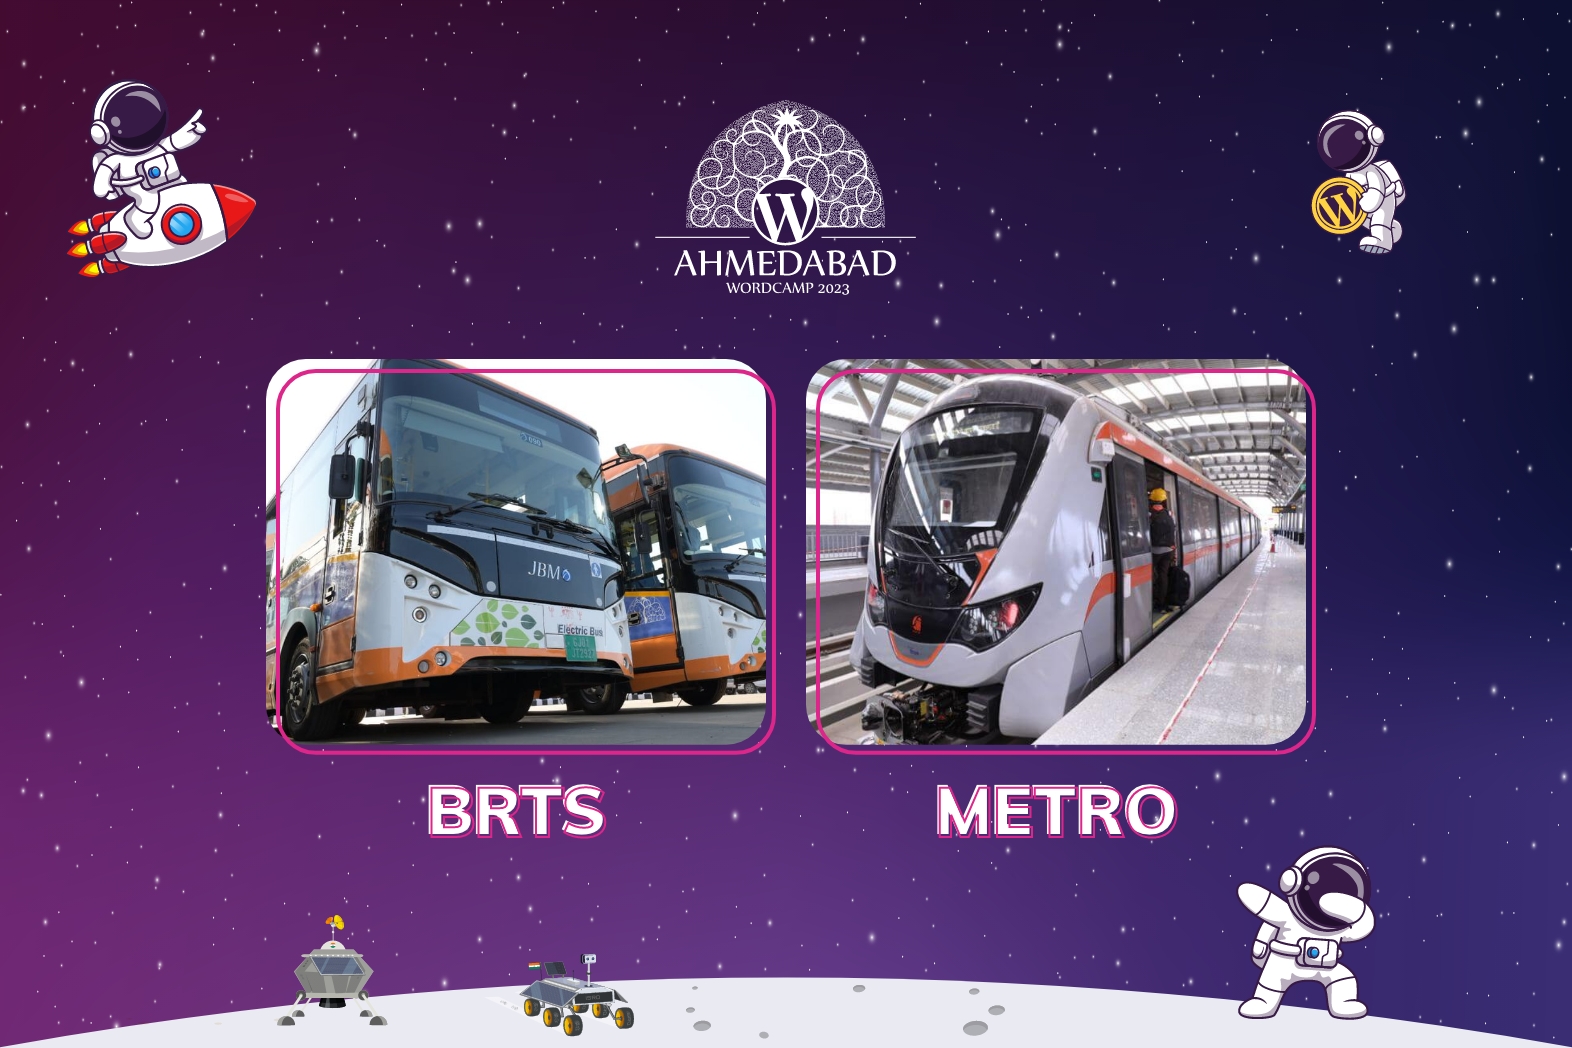 Navigating Ahmedabad with Ease: Metro and BRTS Connectivity for WordCamp Attendees